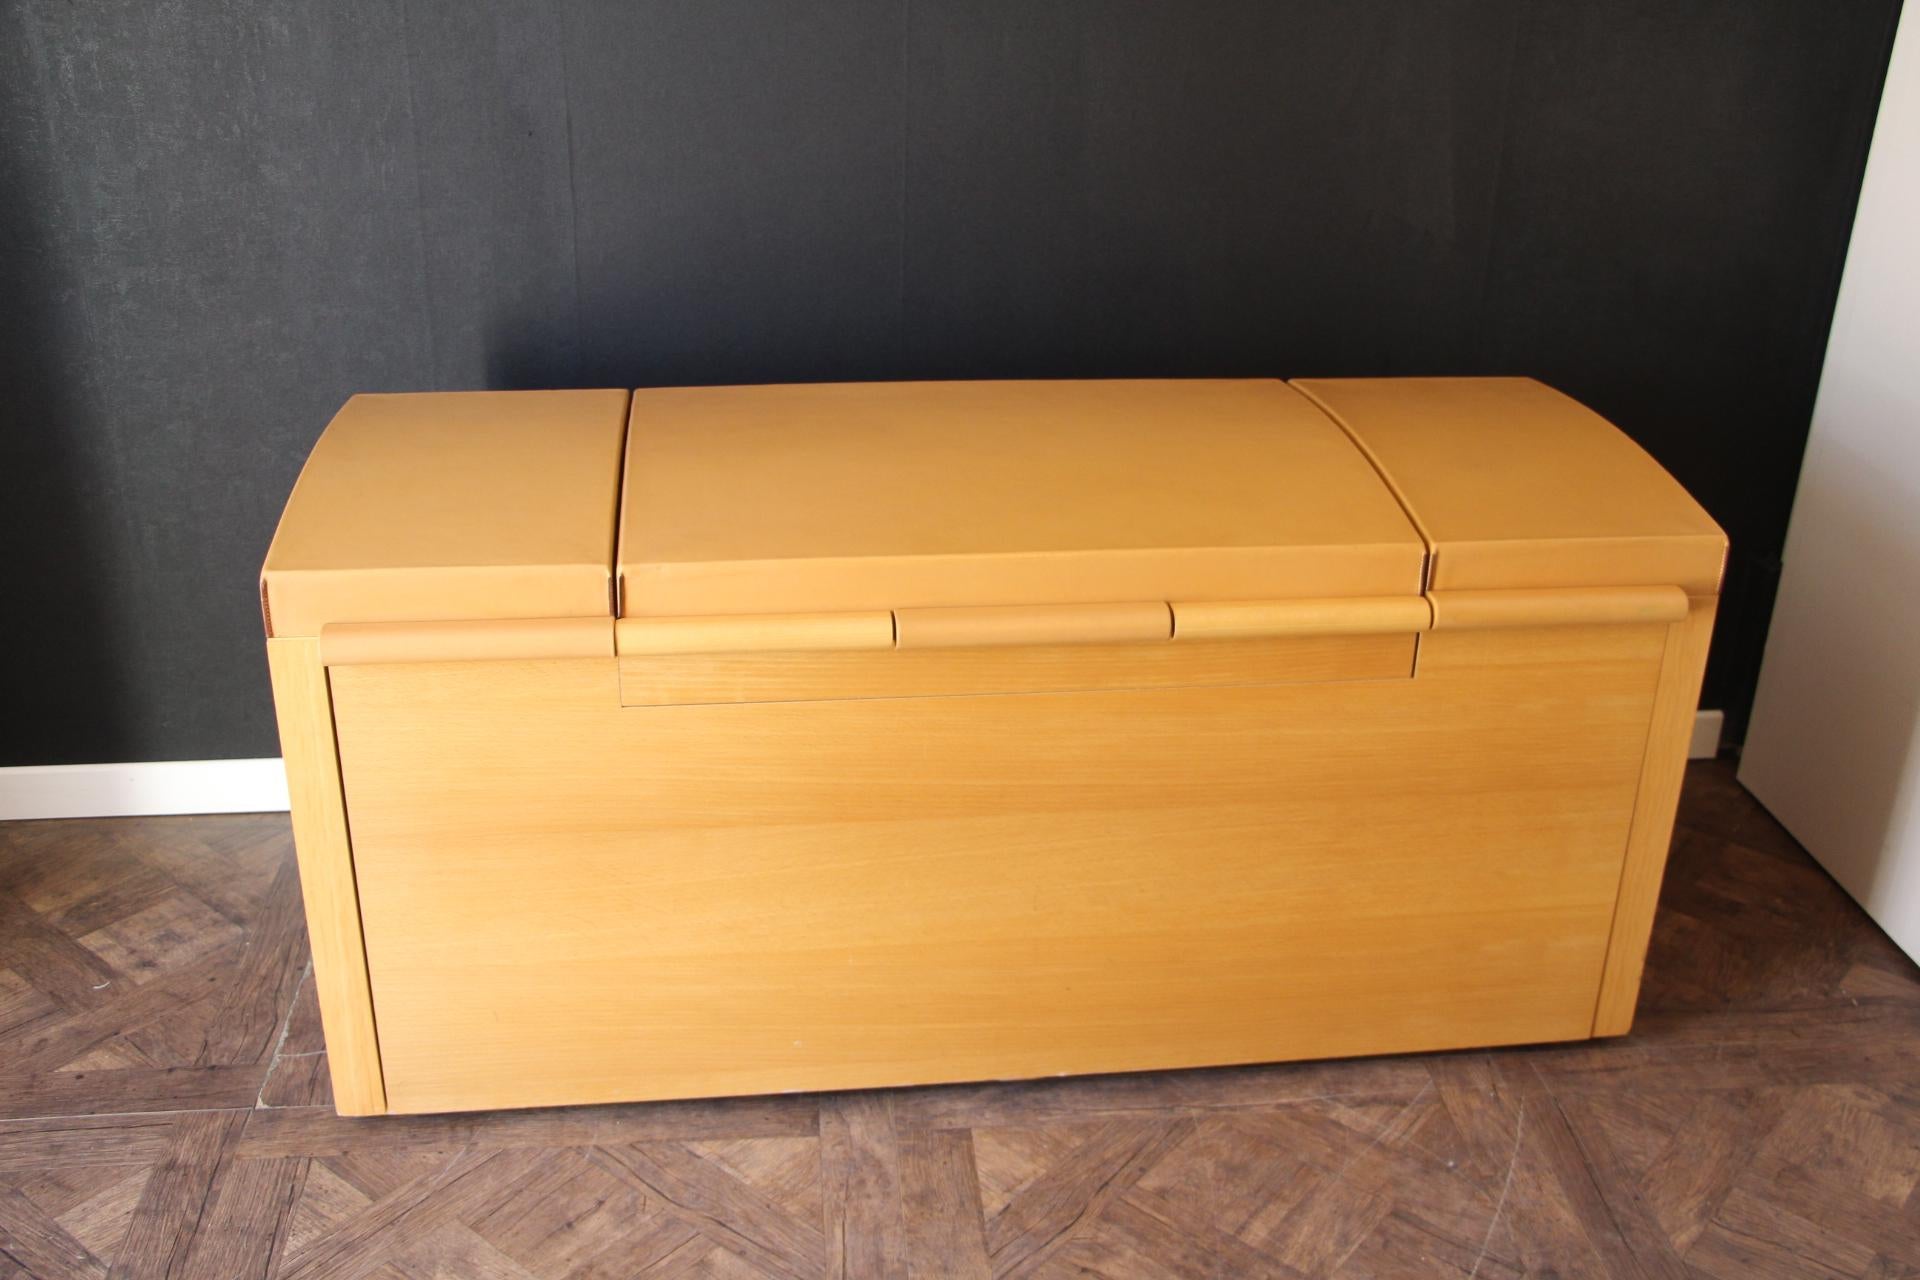 This spectacular shoe trunk was made by Hermes and John Lobb in 1990's. It is in beech wood and all the top section was upholstered by Hermes in natural cowhide Hermes leather. It features two leather side handles, a hinged top compartment with